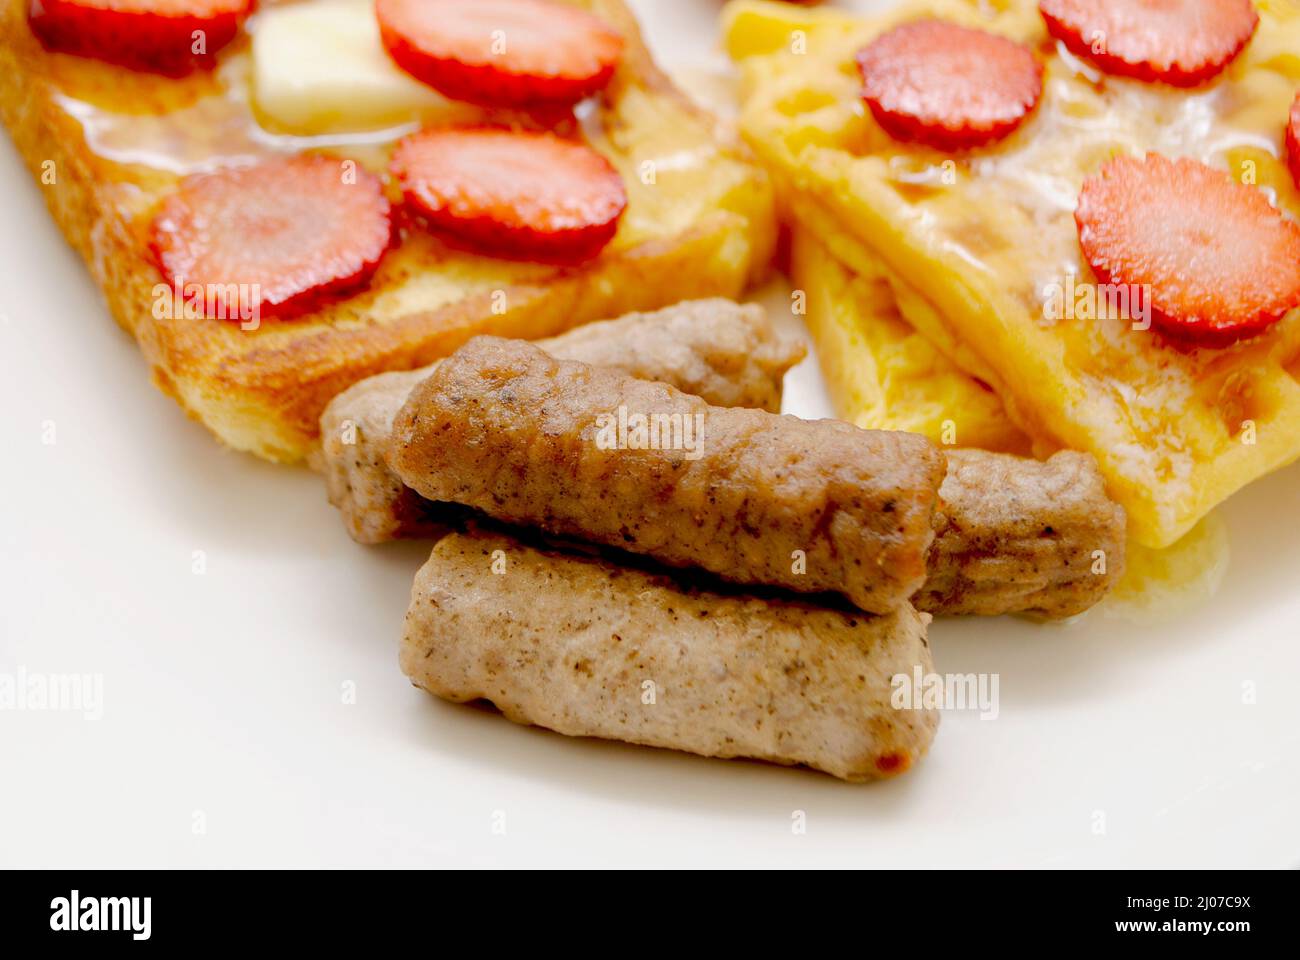 Close-Up of Cooked Breakfast Sausage Links Served on a Plate with Other Breakfast Foods Stock Photo